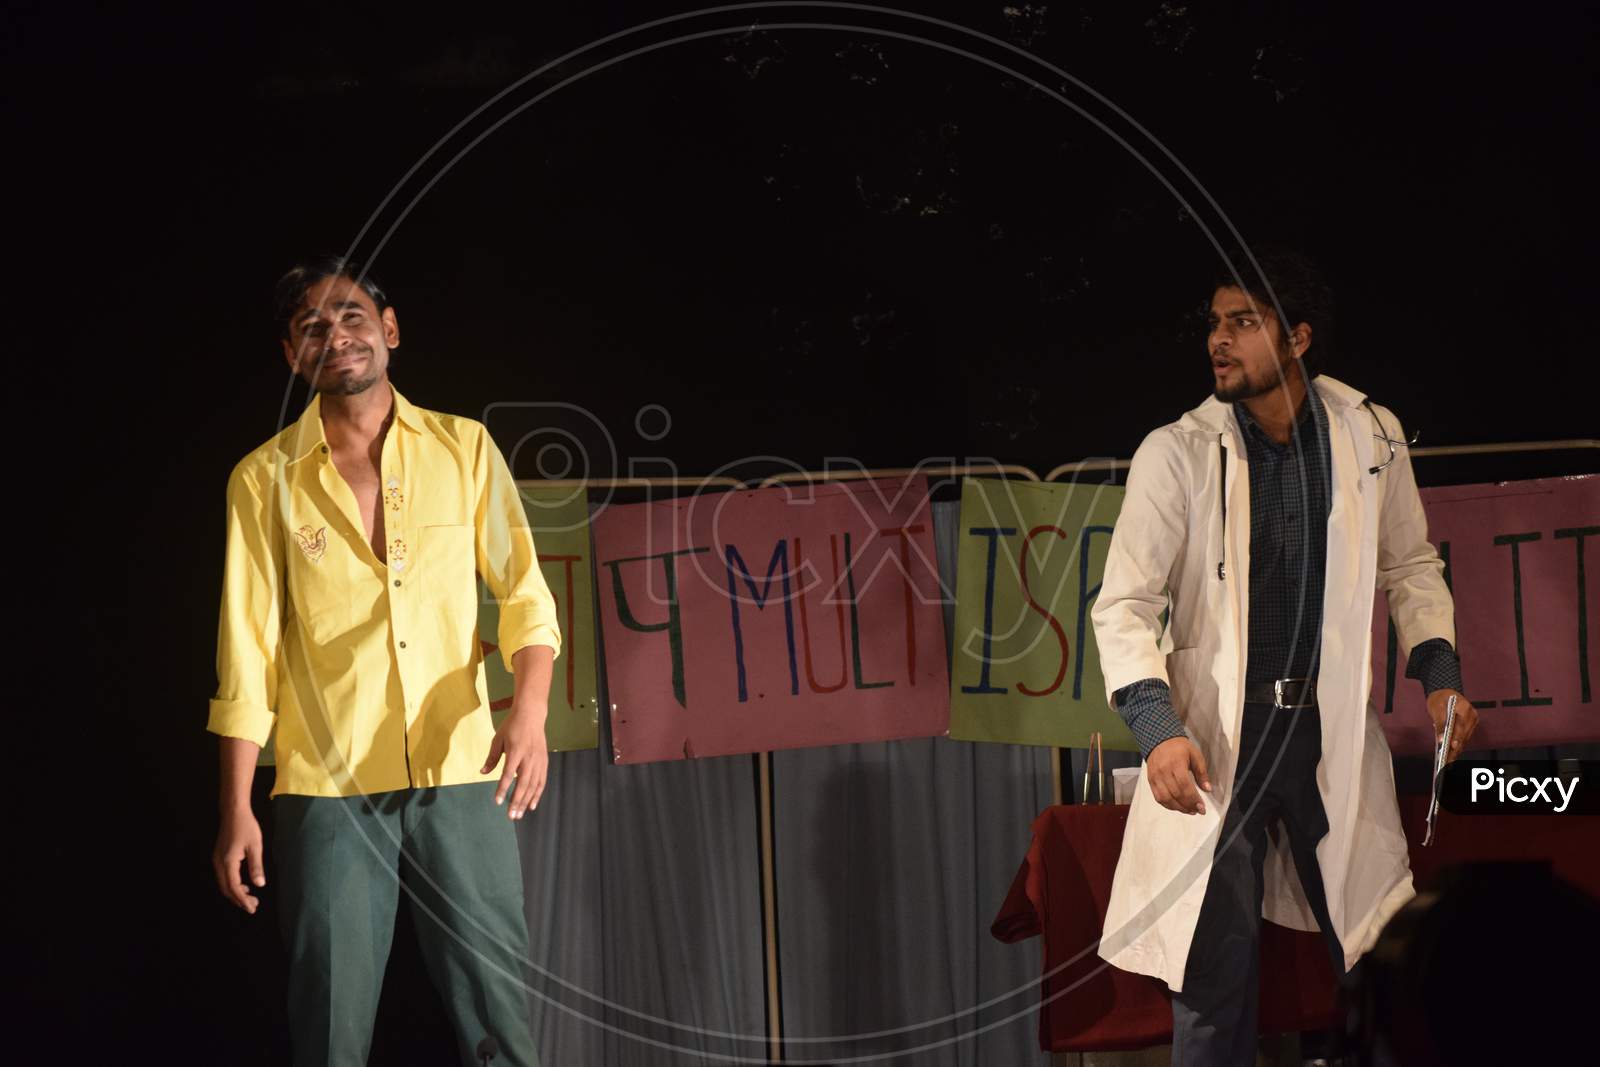 Art Students  Performing Skit Or Stage Show During an College Event